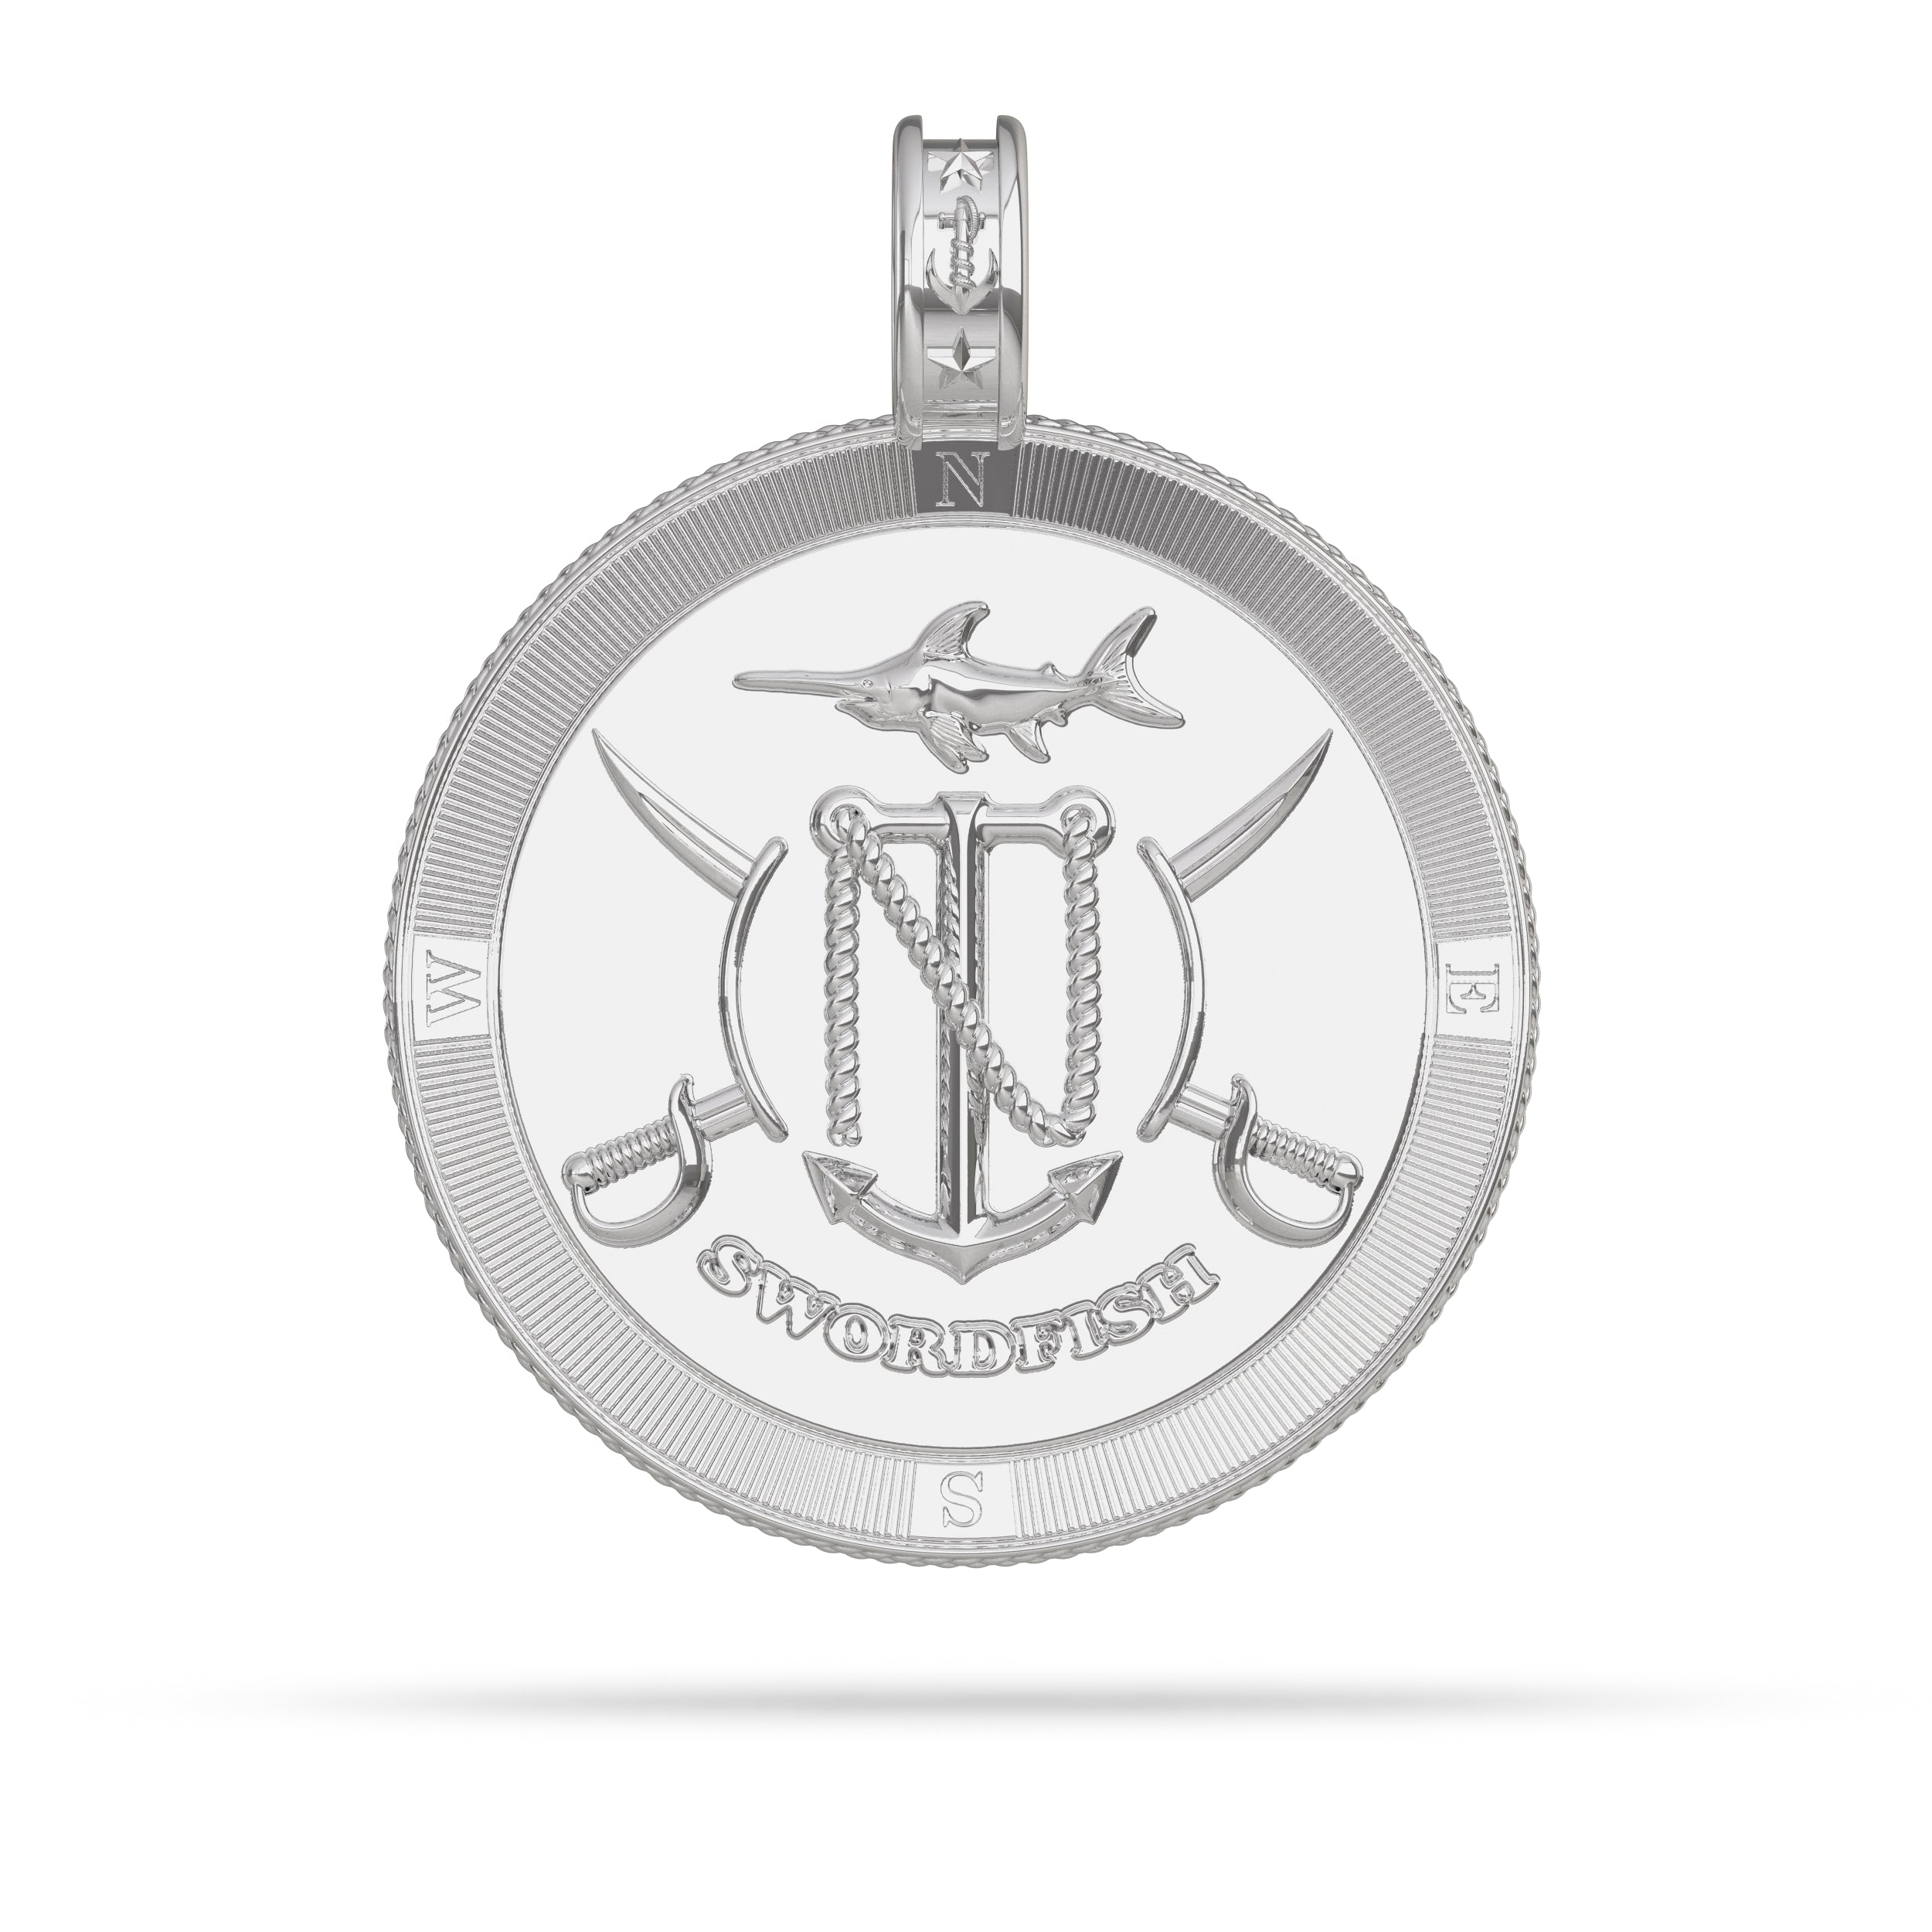  Swordfish Compass Medallion Pendant Large in Silver by Nautical Treasure reverse 